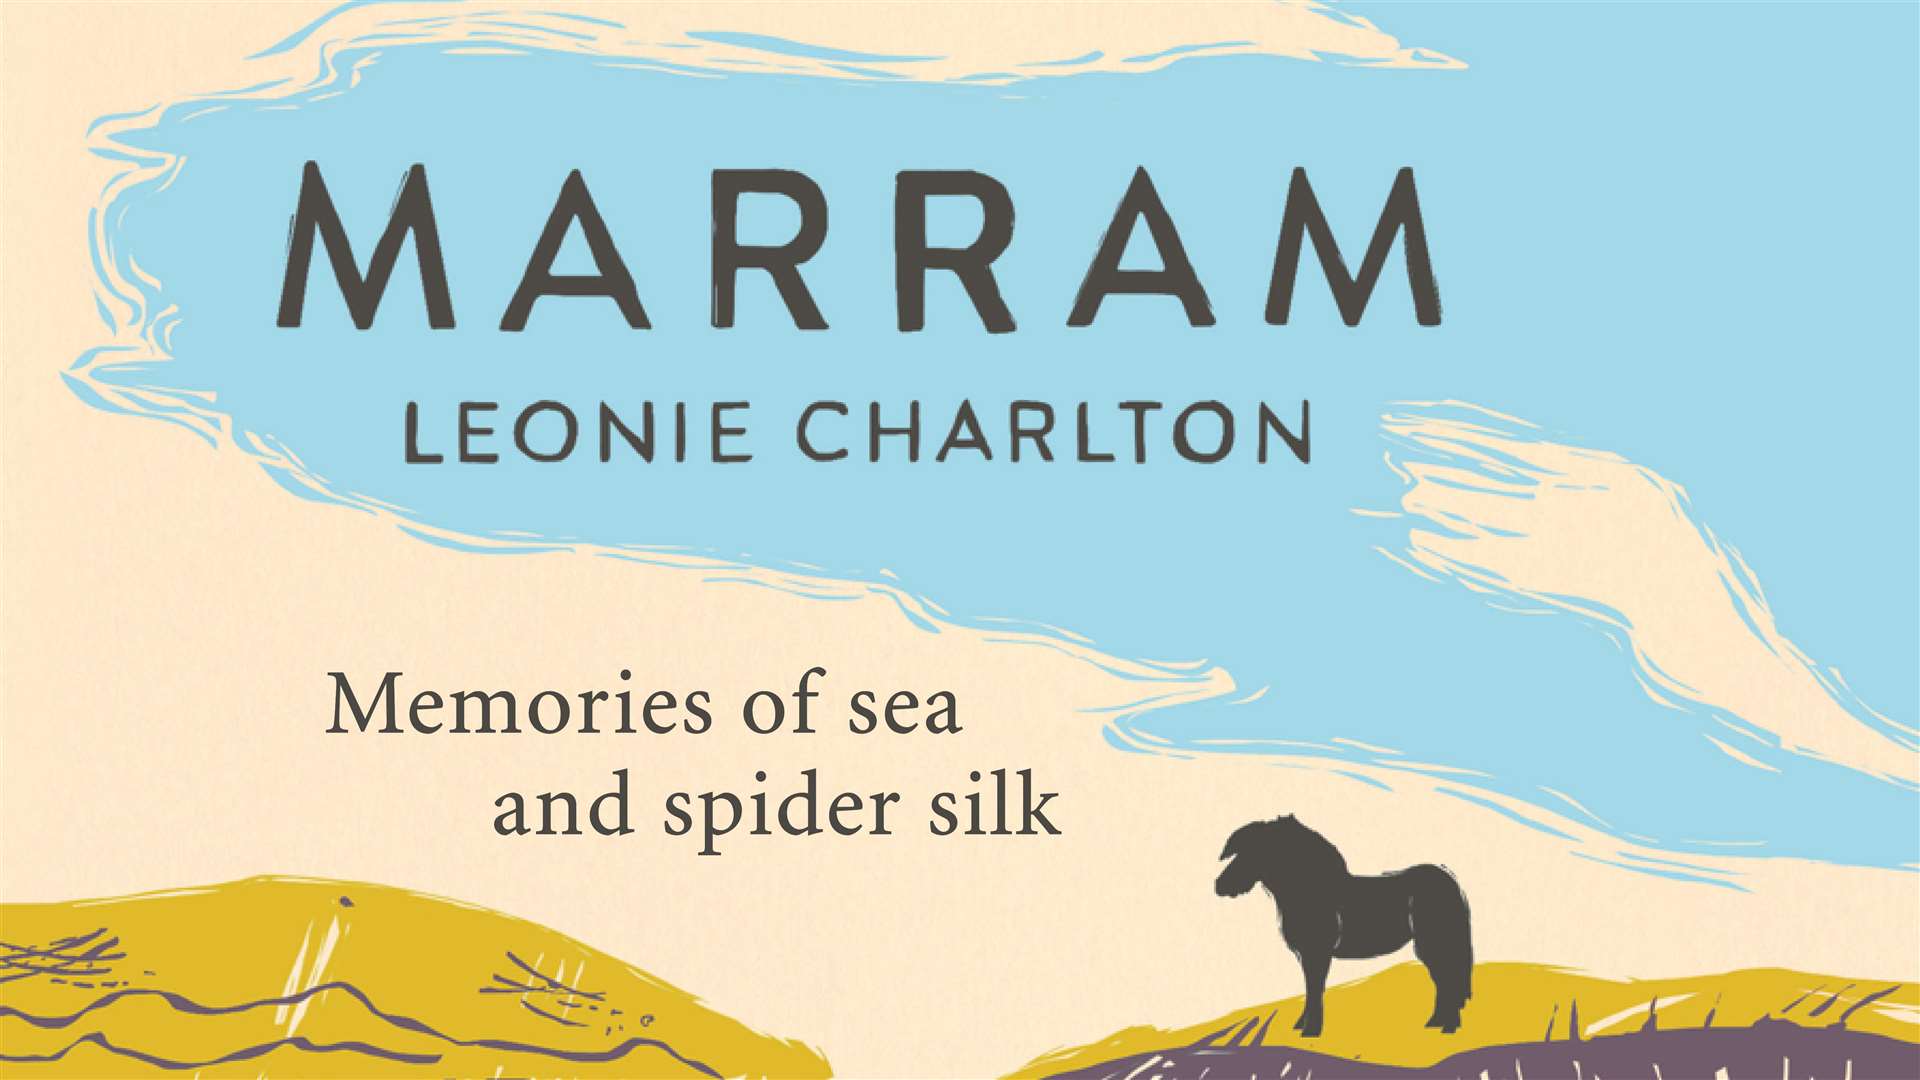 Marram: memories of sea and spider silk is now available in paperback.